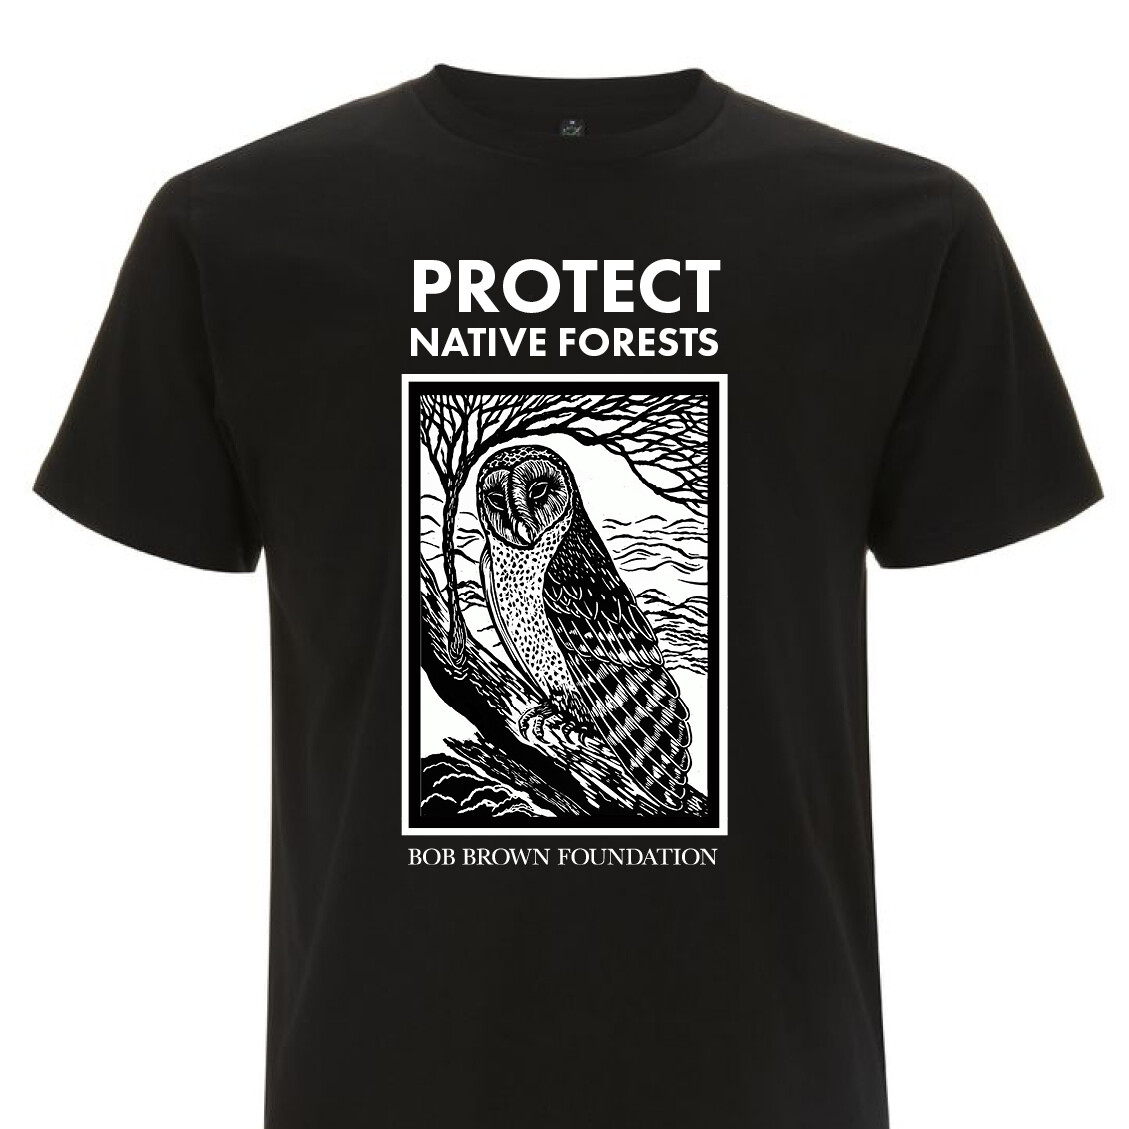 Protect Native Forests tee